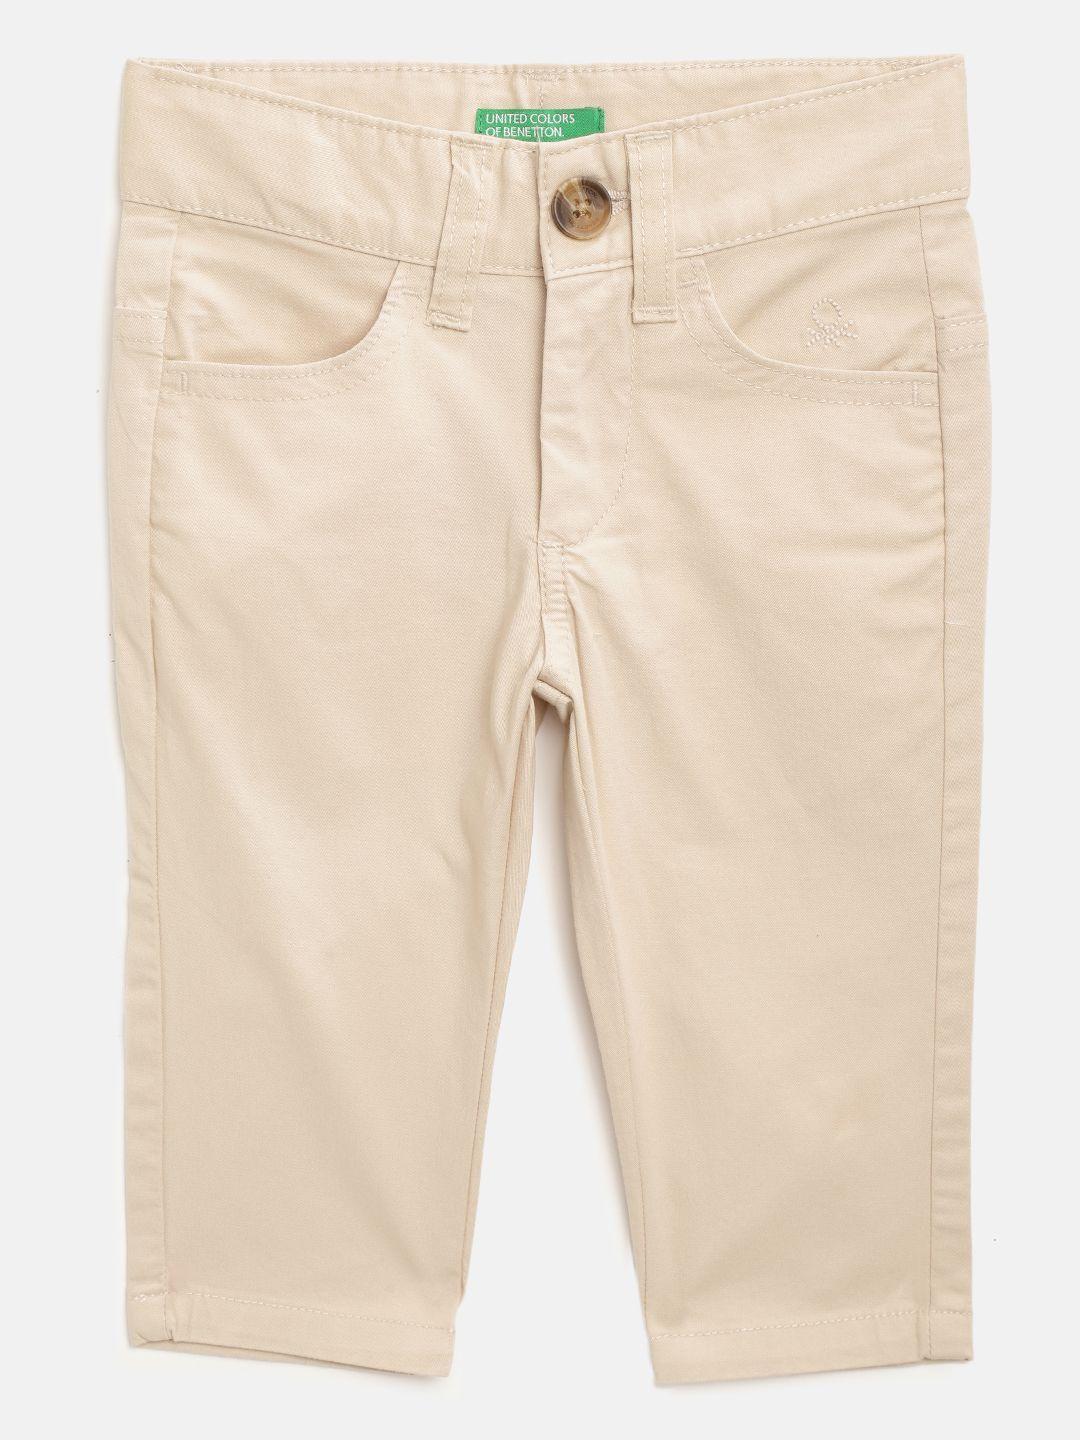 united colors of benetton boys beige regular fit solid trousers